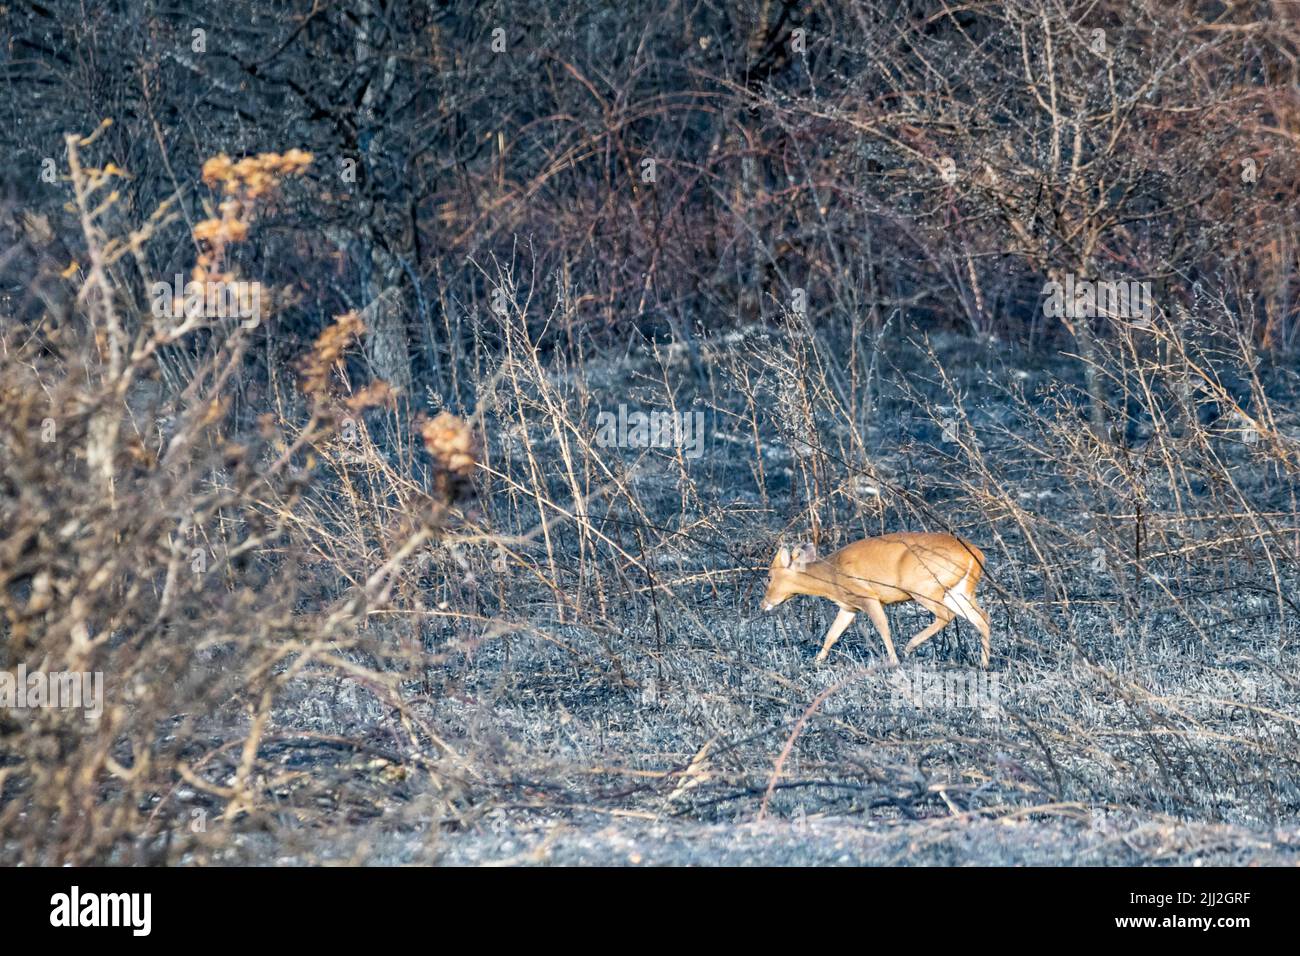 Muntjac deer, Muntiacus reevesi, picking its way through burnt undergrowth destroyed in fire at Snettisham Country Park during heatwave of July 2022. Stock Photo